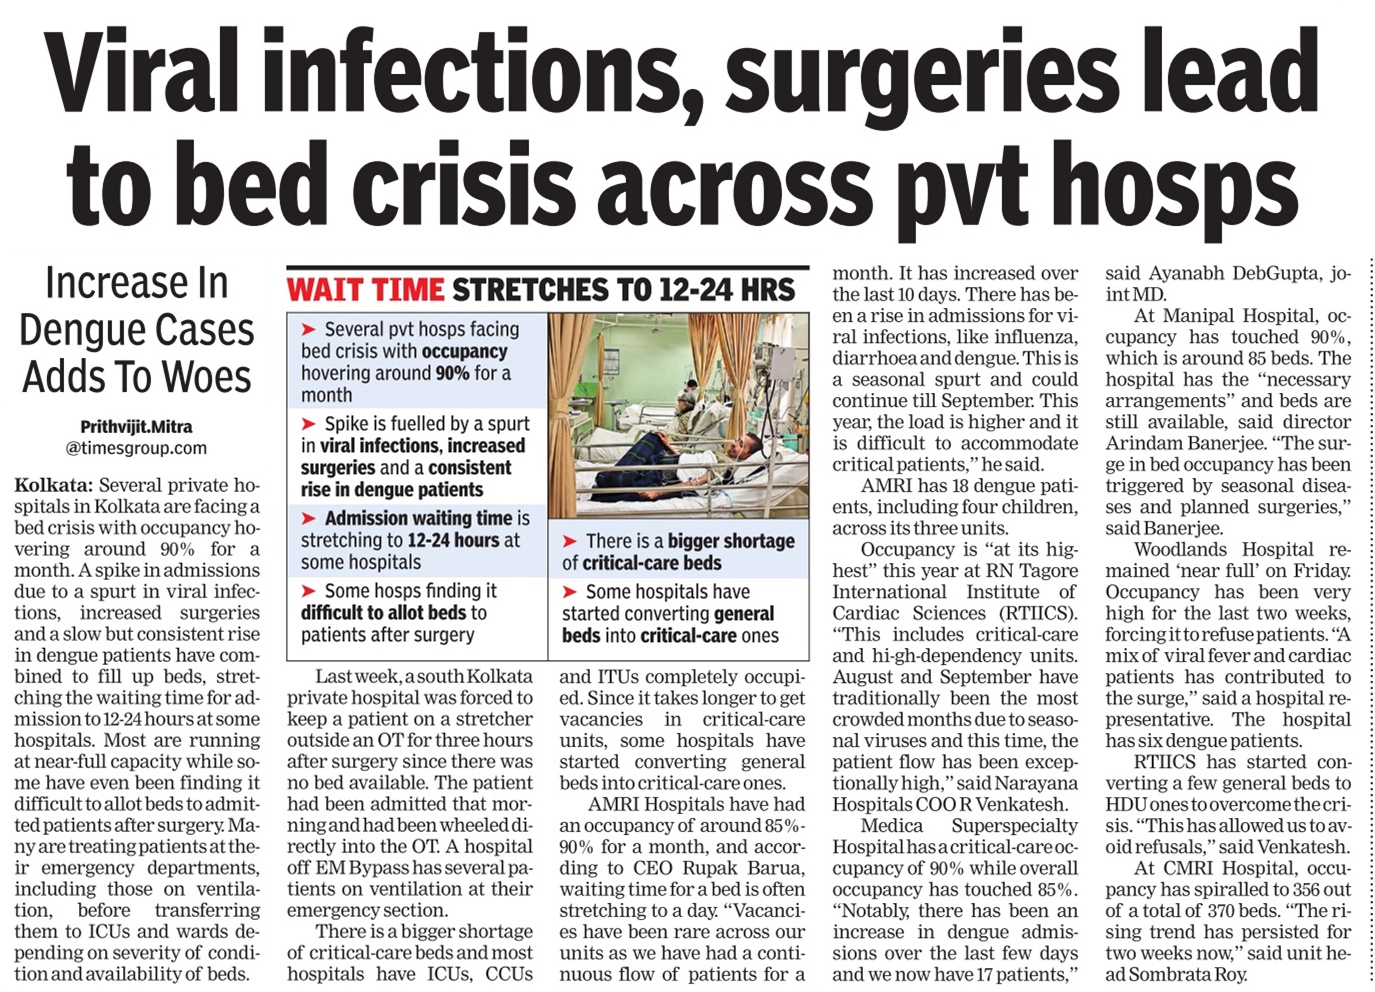 Viral infections, surgeries lead to bed crisis across pvt hosps